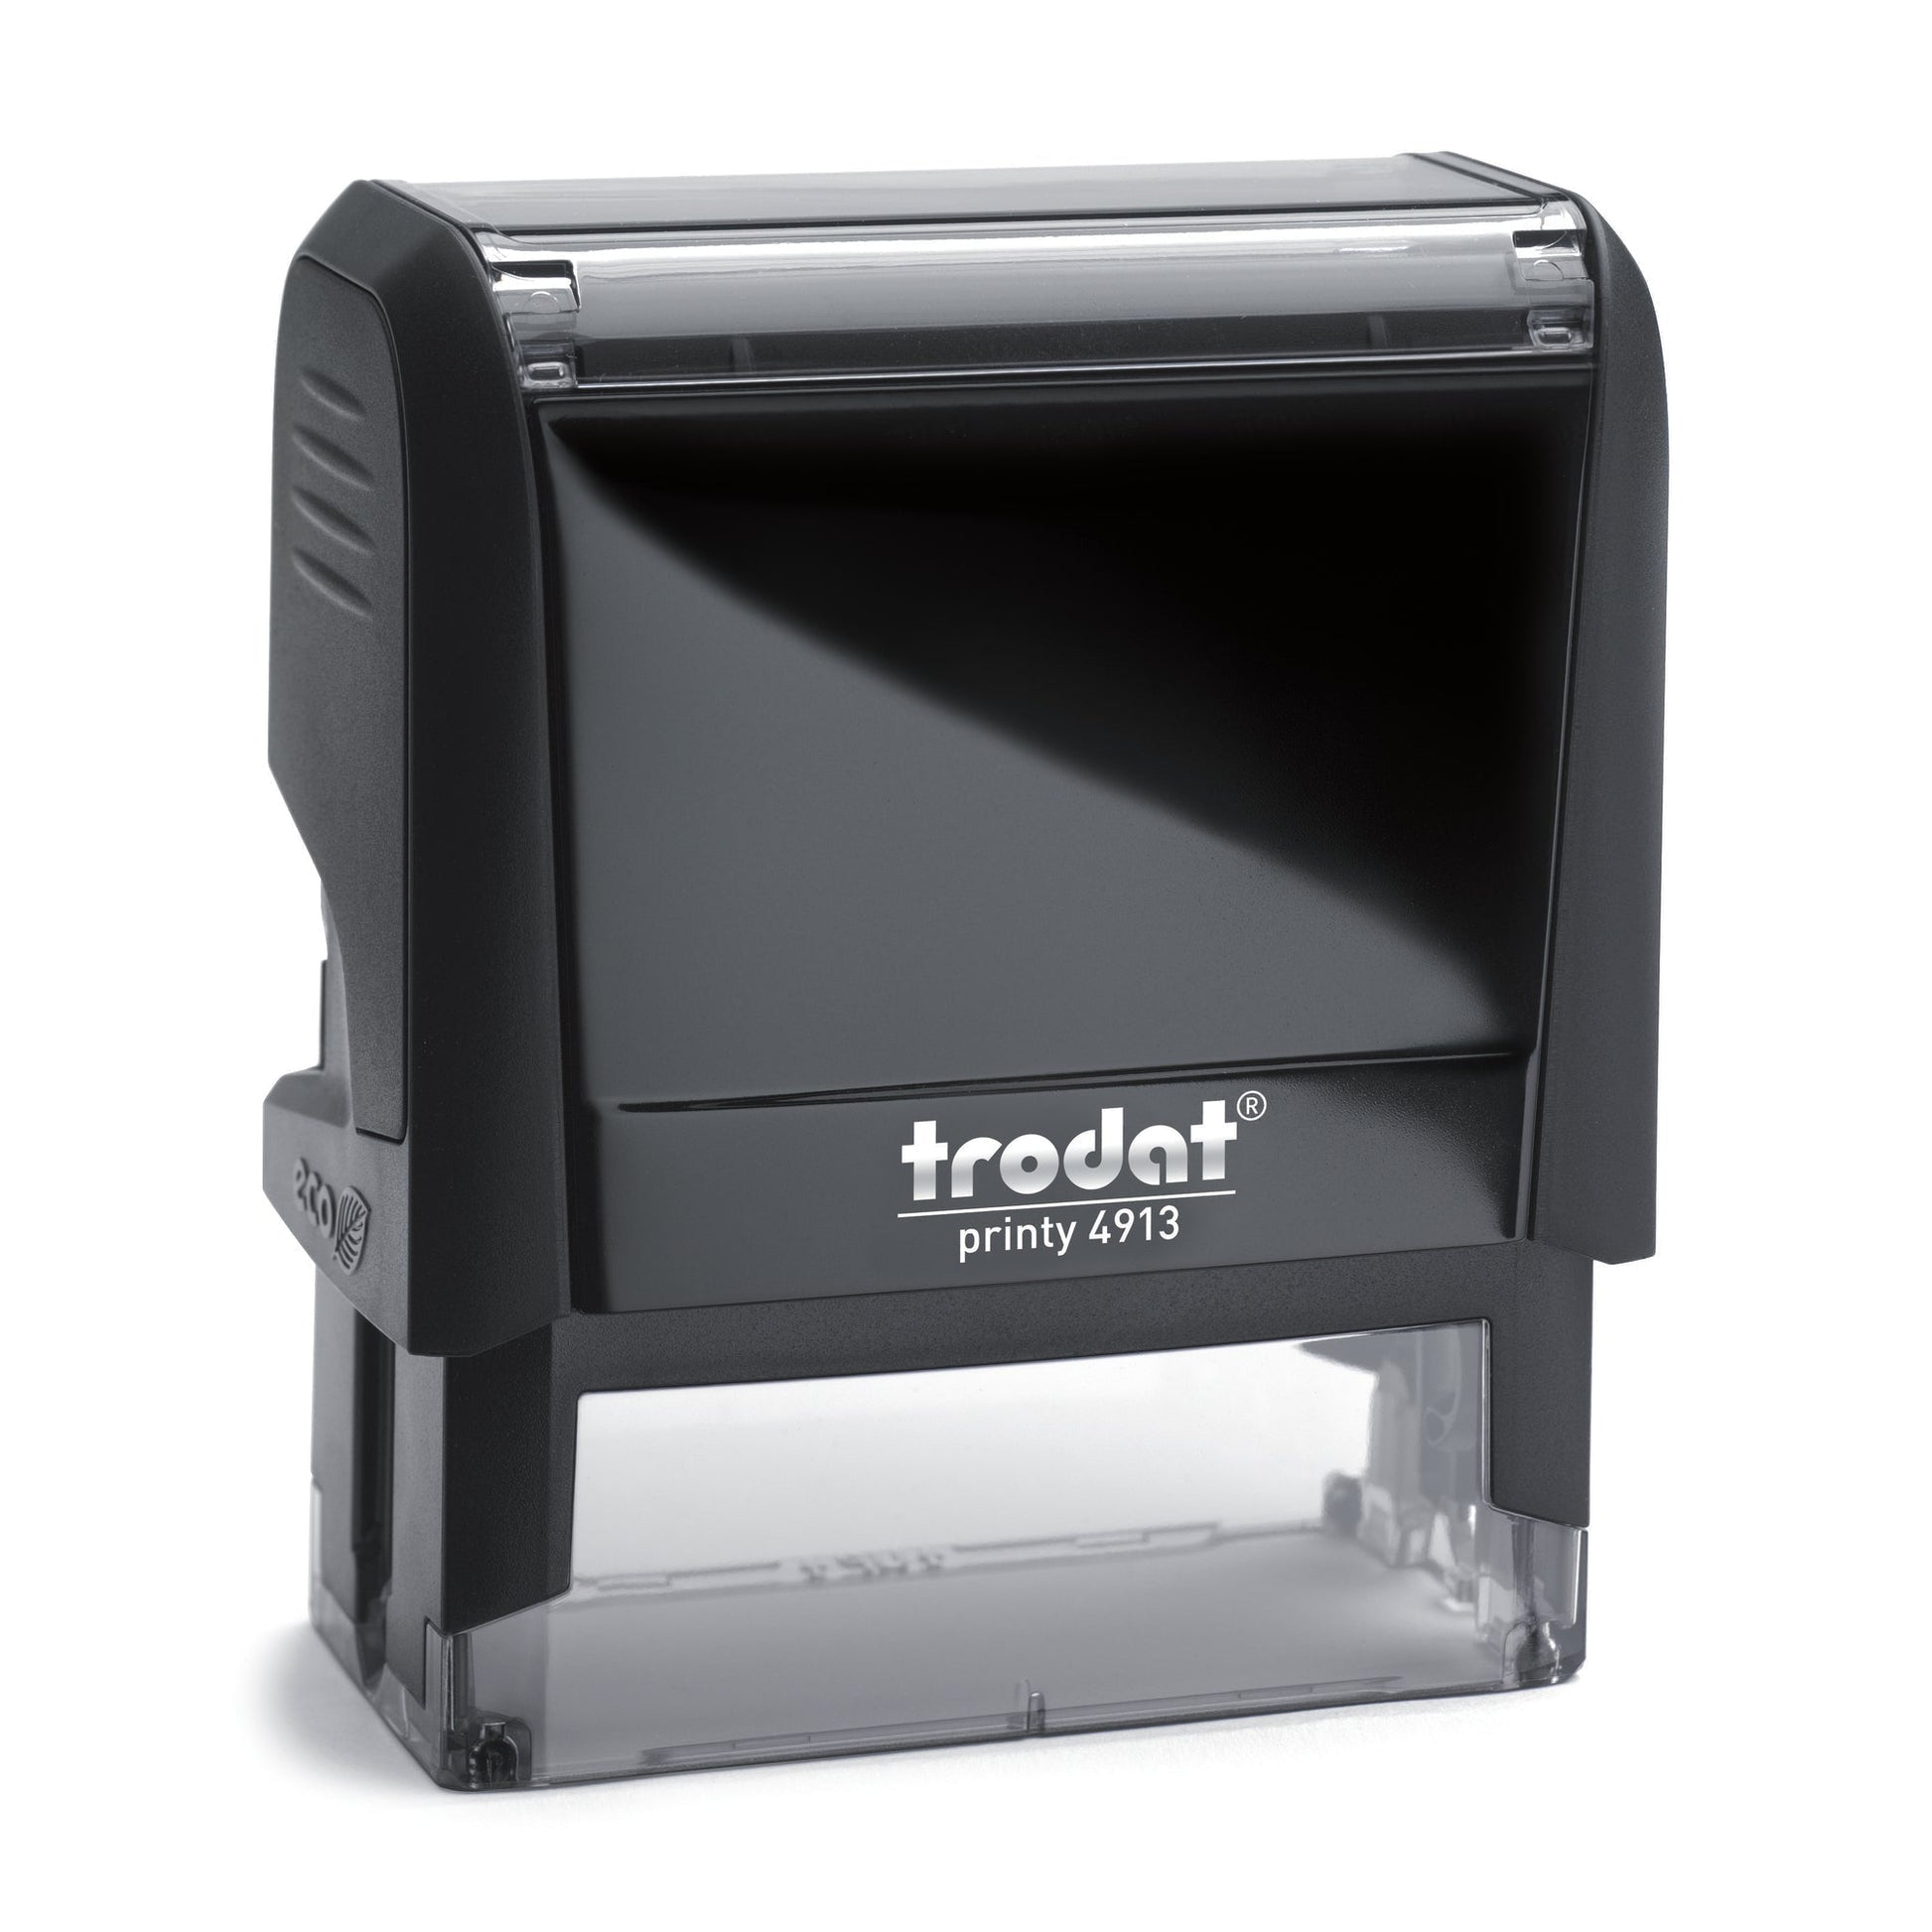 Dealer Serviced To Manufacturers Schedule - Self Inking Rubber Stamp - Trodat 4913 - 55mm x 21mm Impression